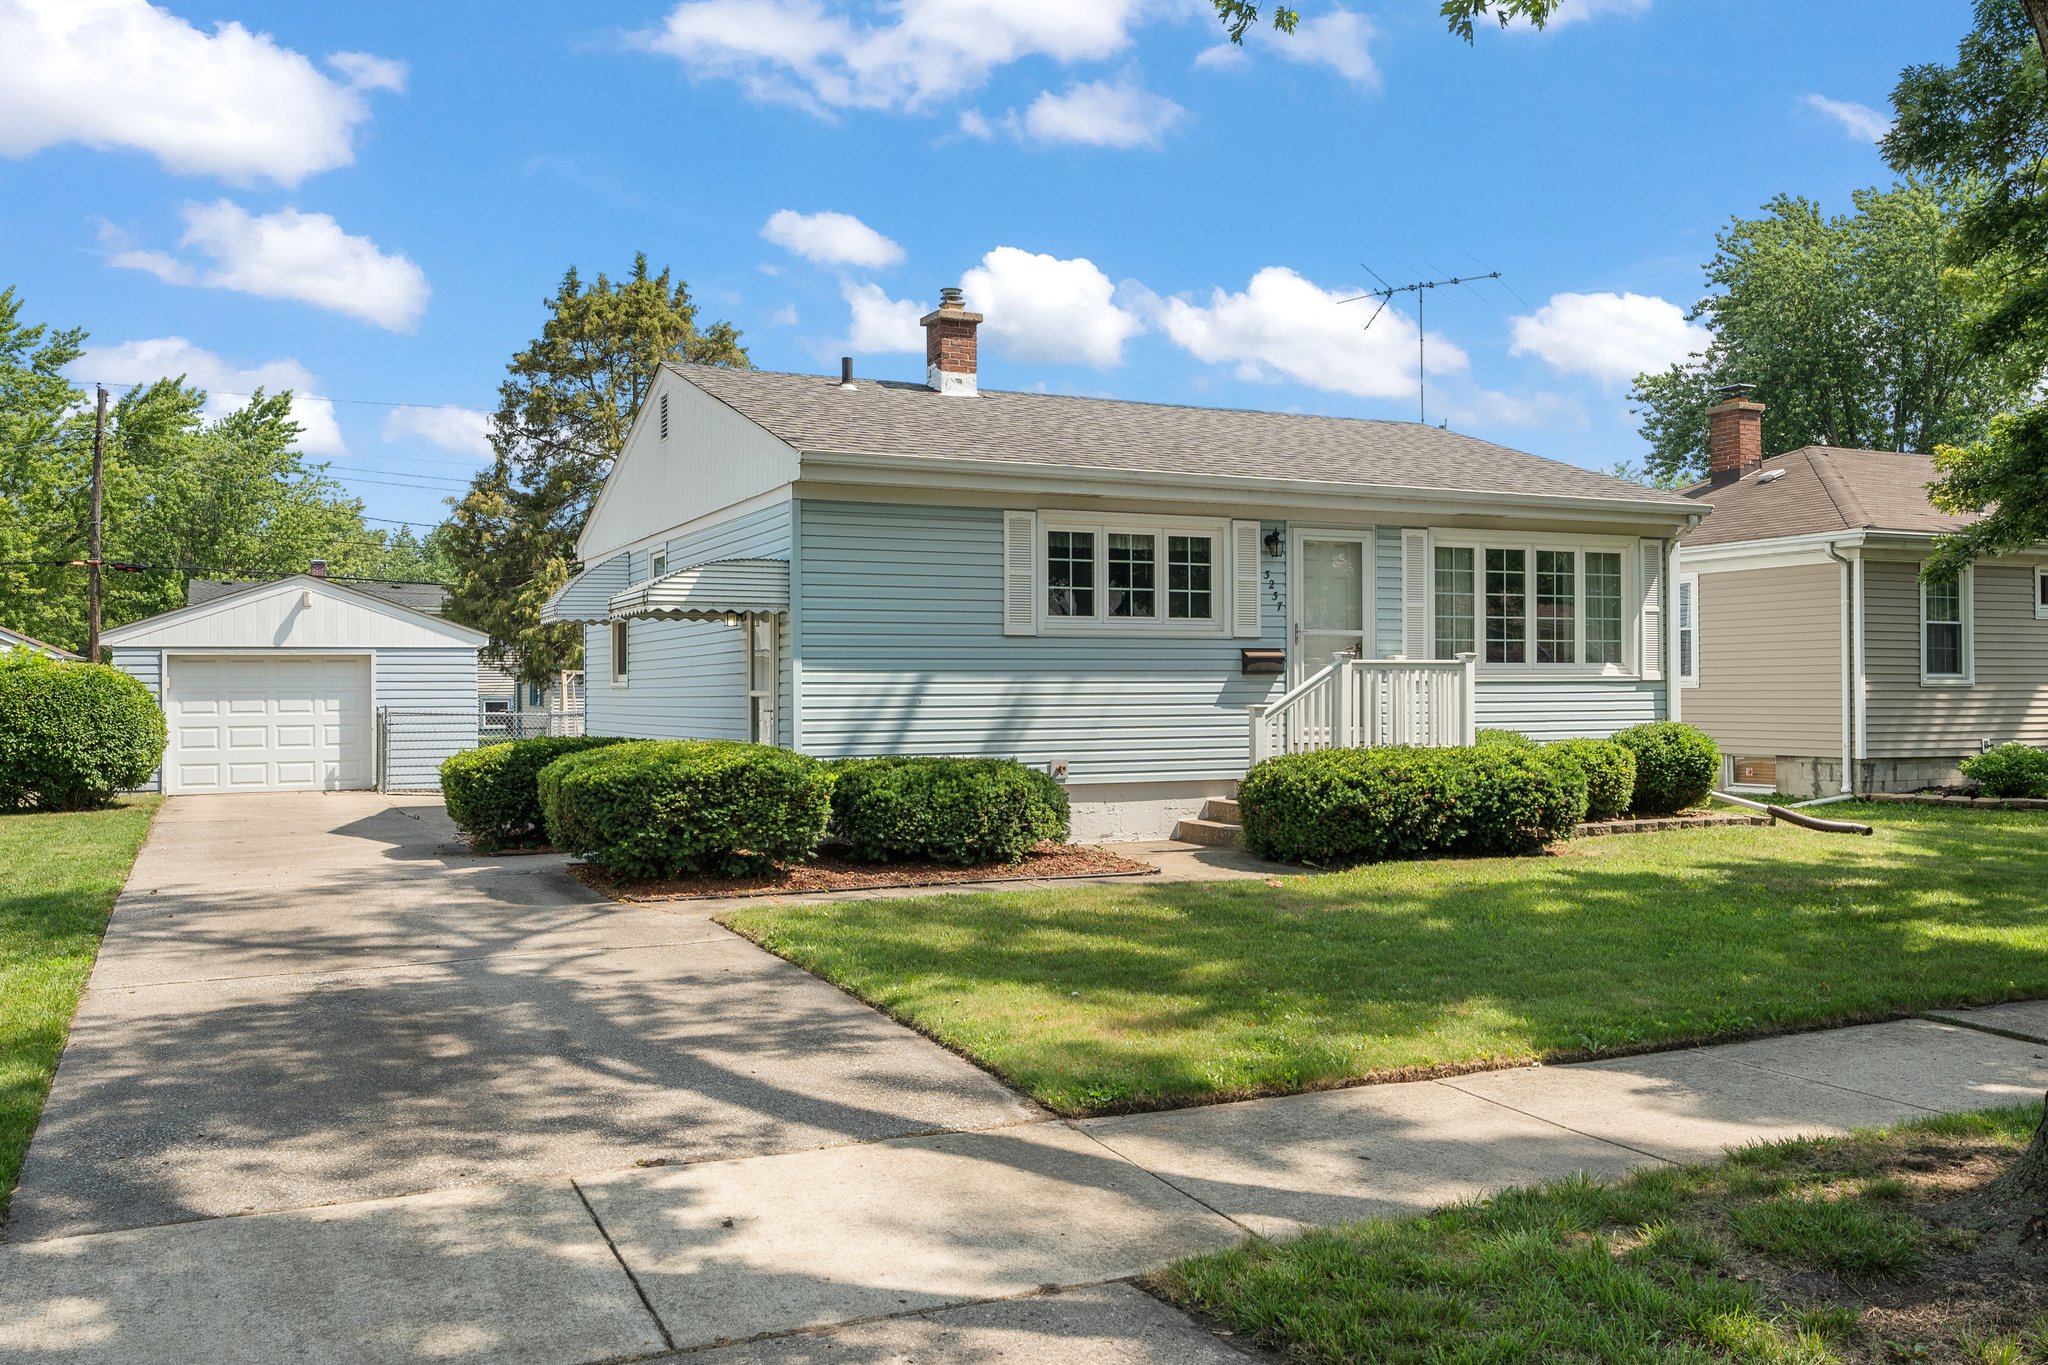 This home located at 3237 Eder St in Highland, Indiana sold for $225,000 after just a few days on the market. That is $10,000 above list price.